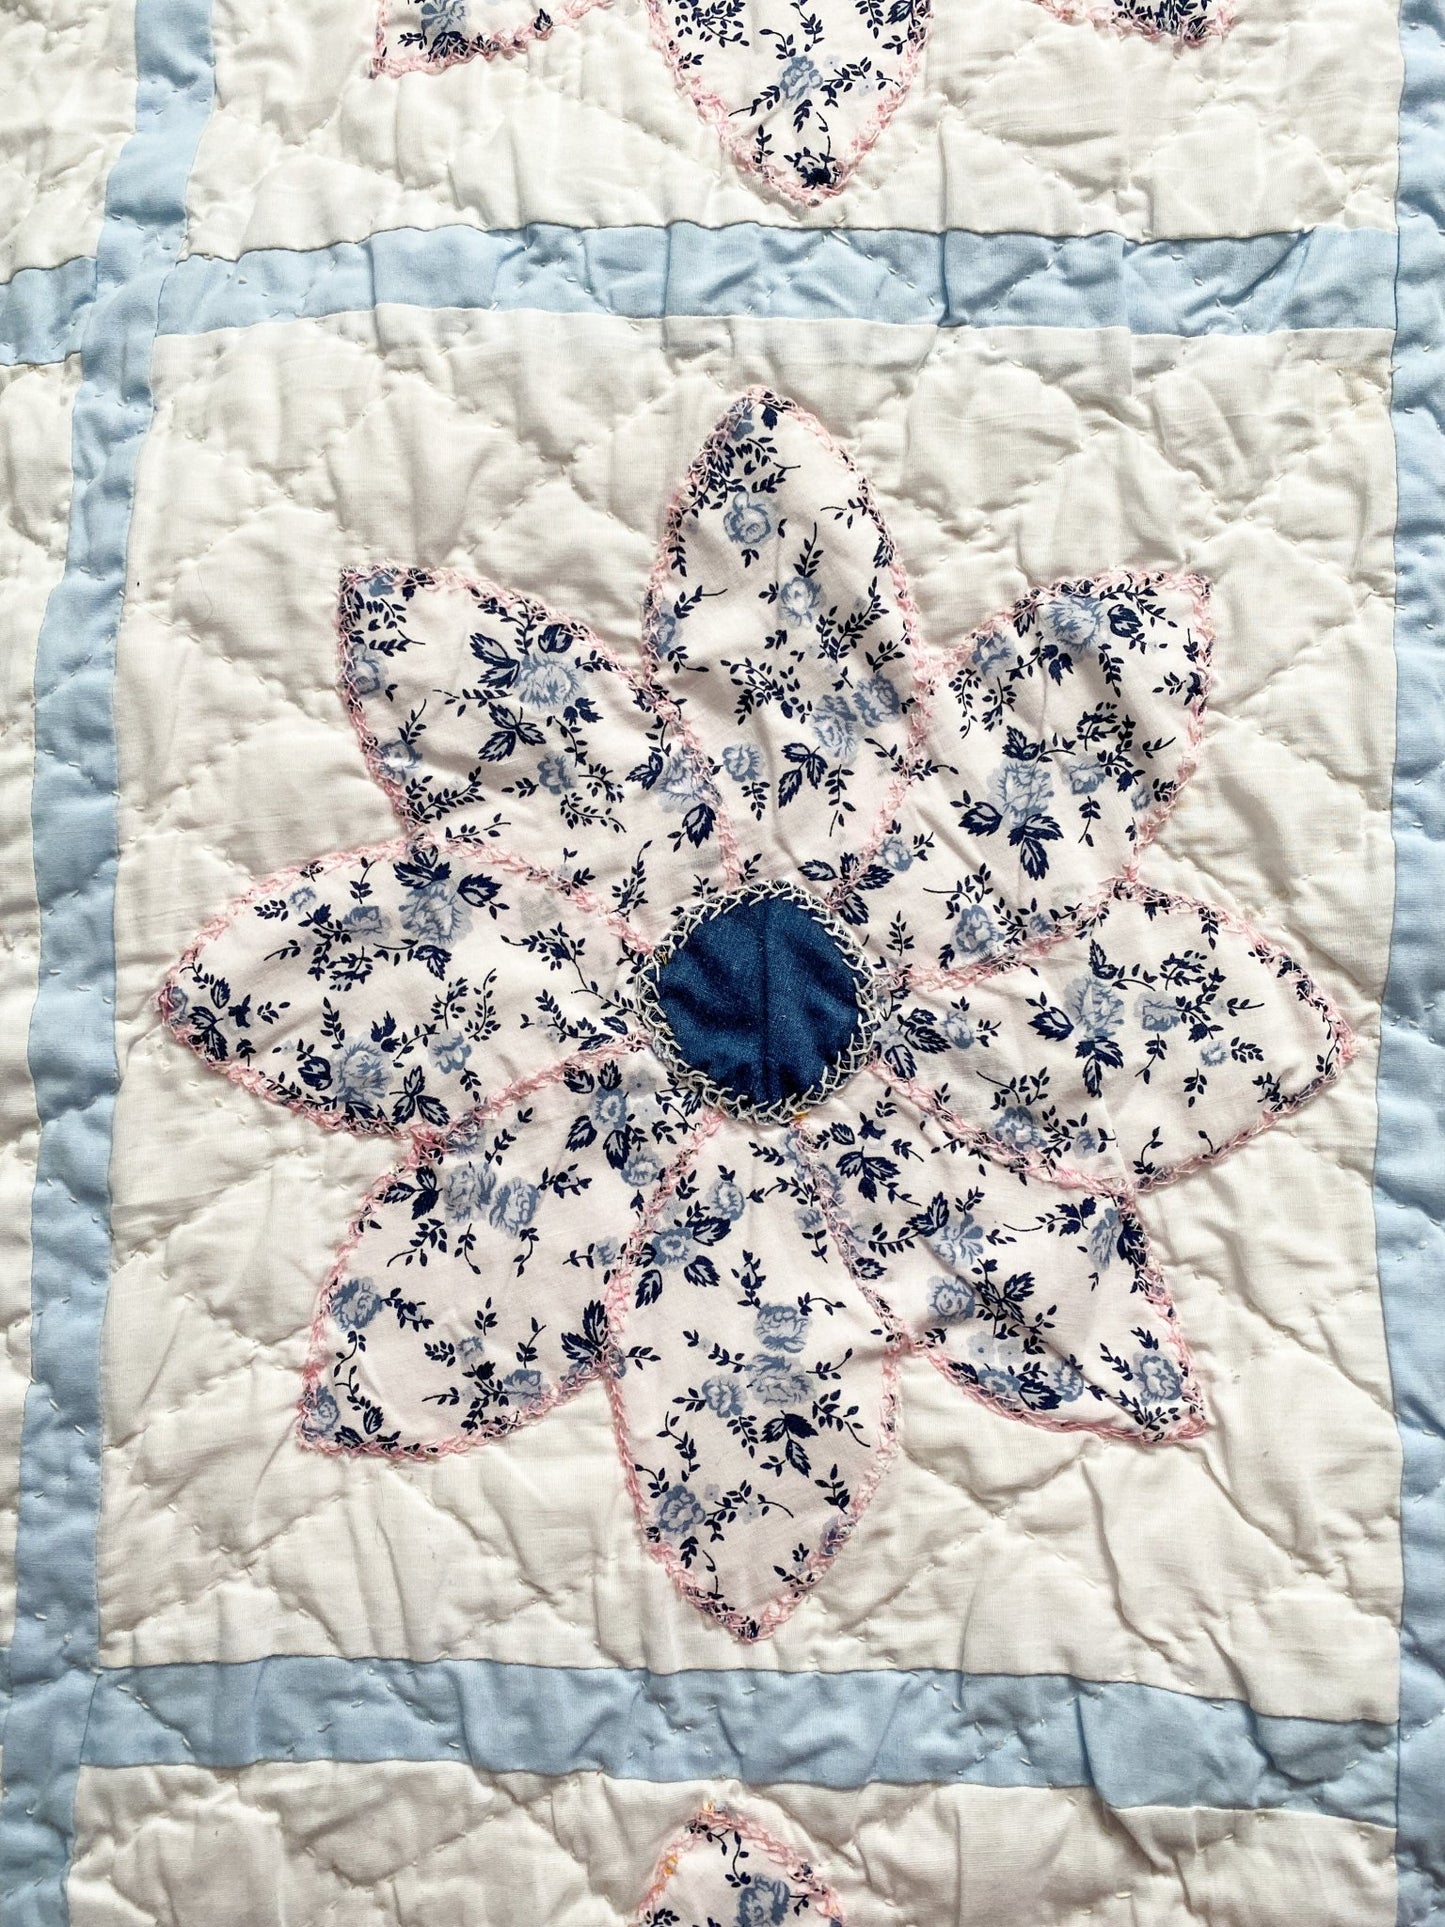 Vintage Handmade Quilt with White and Purple Flowers - Perth Market